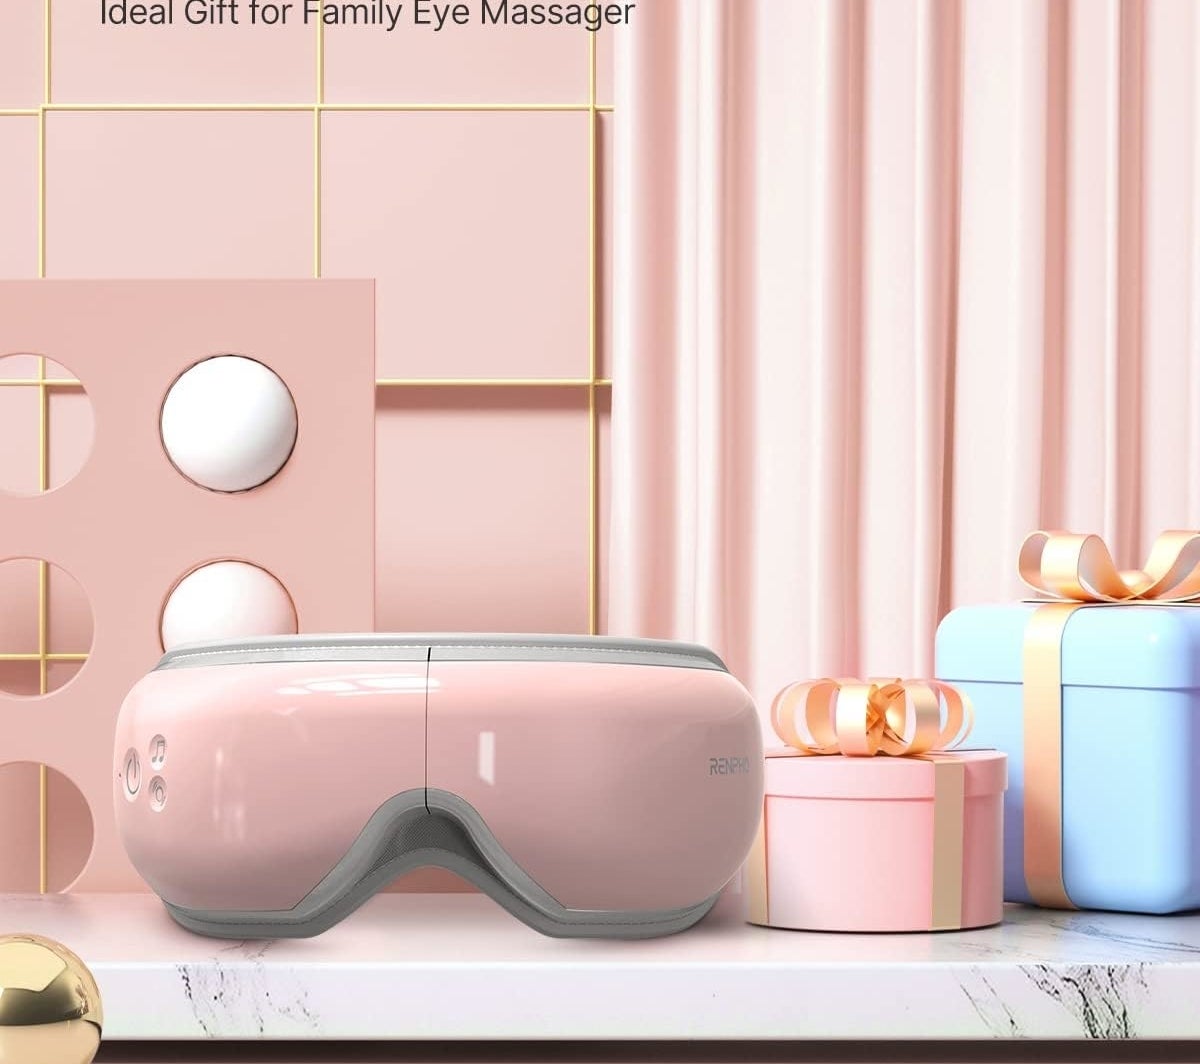 The eye massager in pink